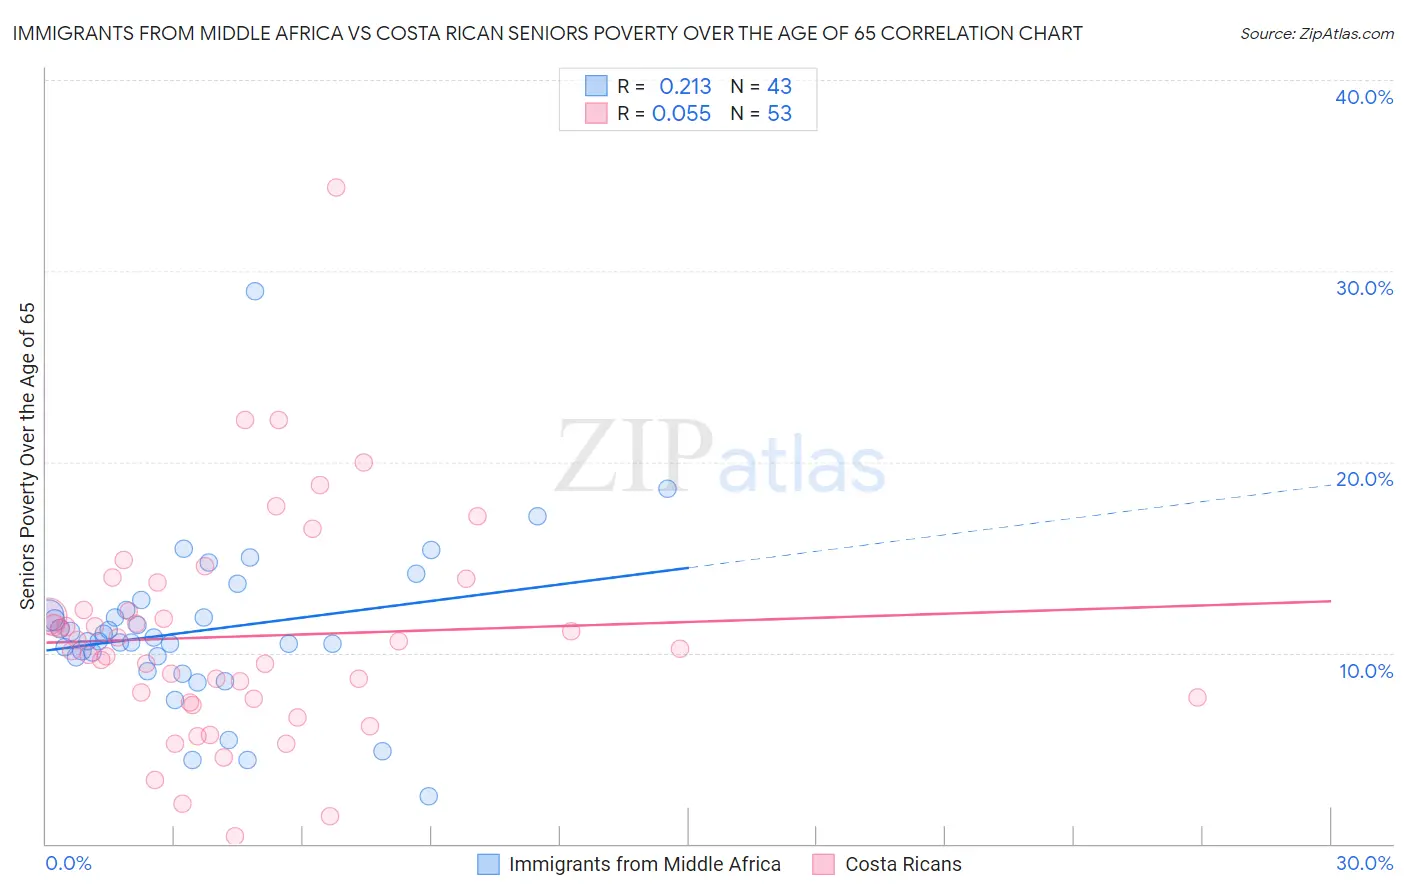 Immigrants from Middle Africa vs Costa Rican Seniors Poverty Over the Age of 65